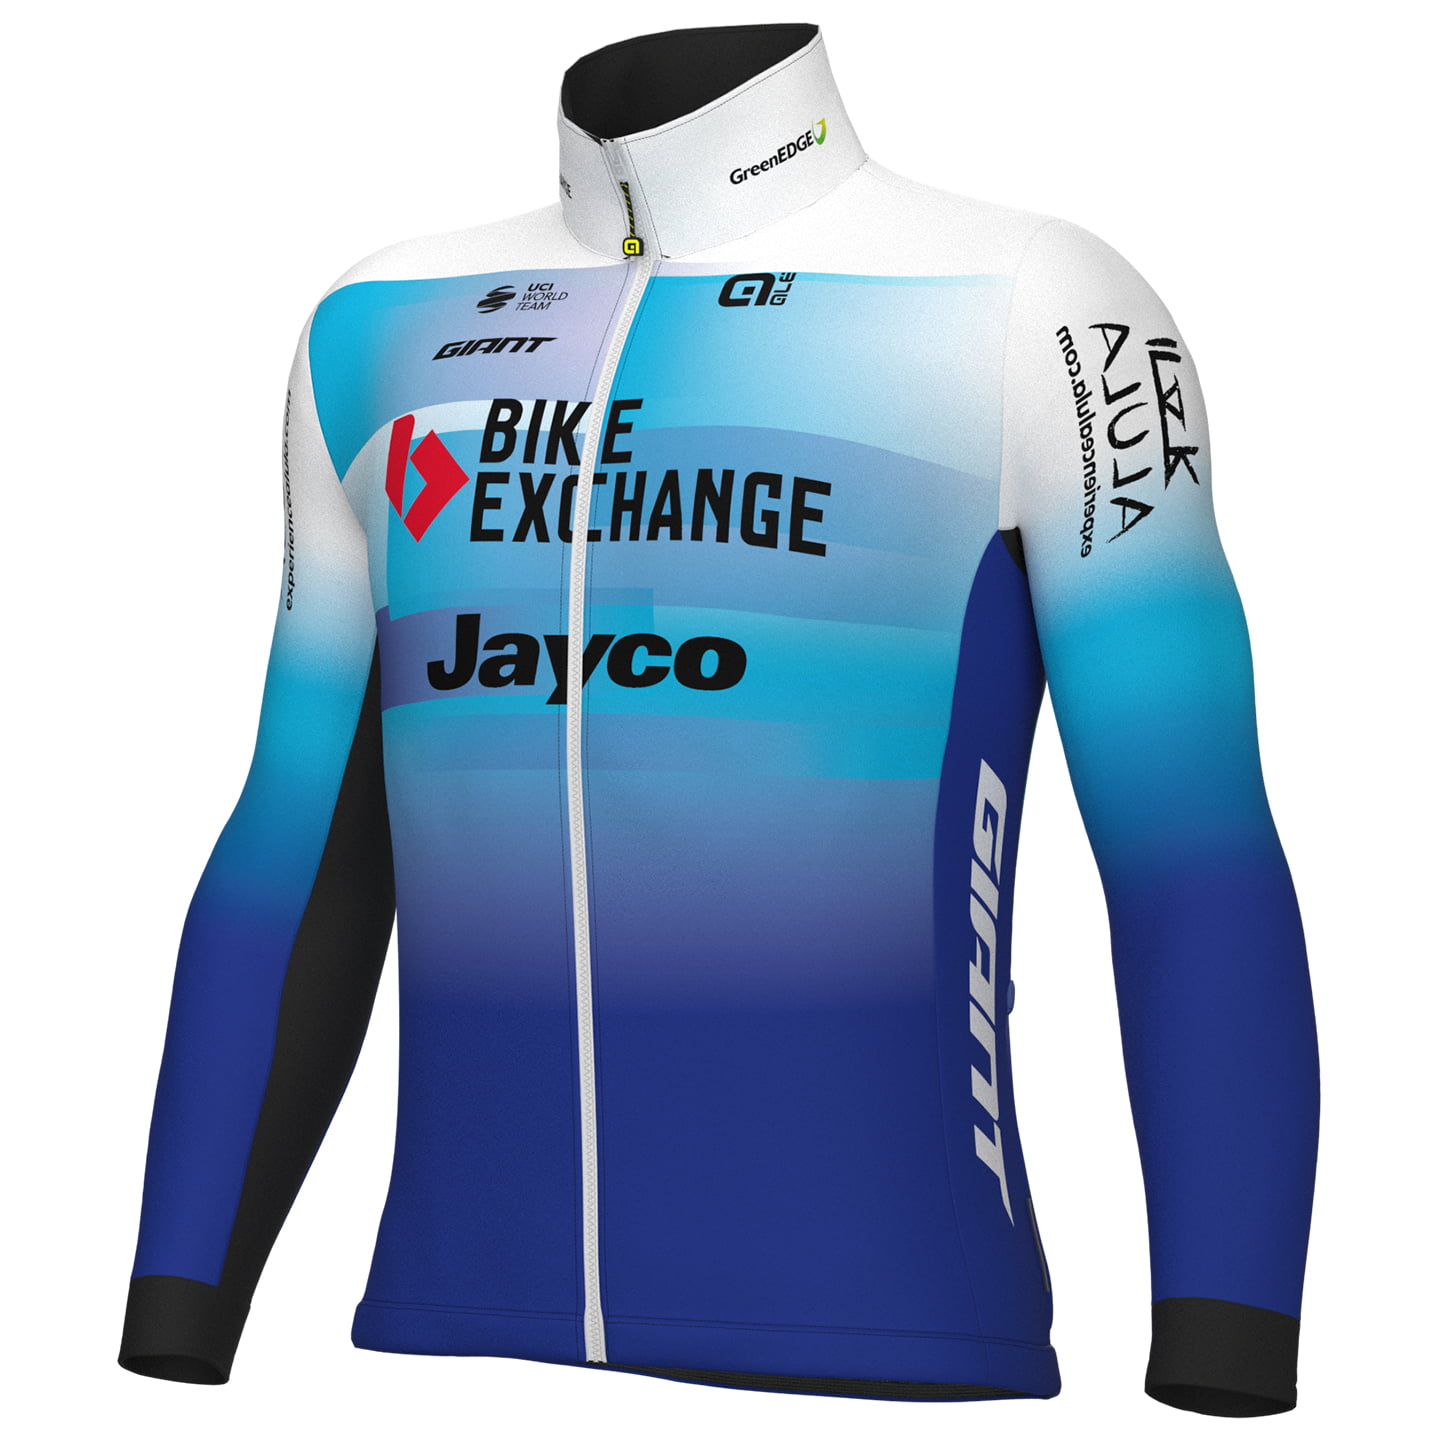 TEAM BIKEEXCHANGE-JAYCO 2022 Thermal Jacket, for men, size 2XL, Cycle jacket, Cycling gear